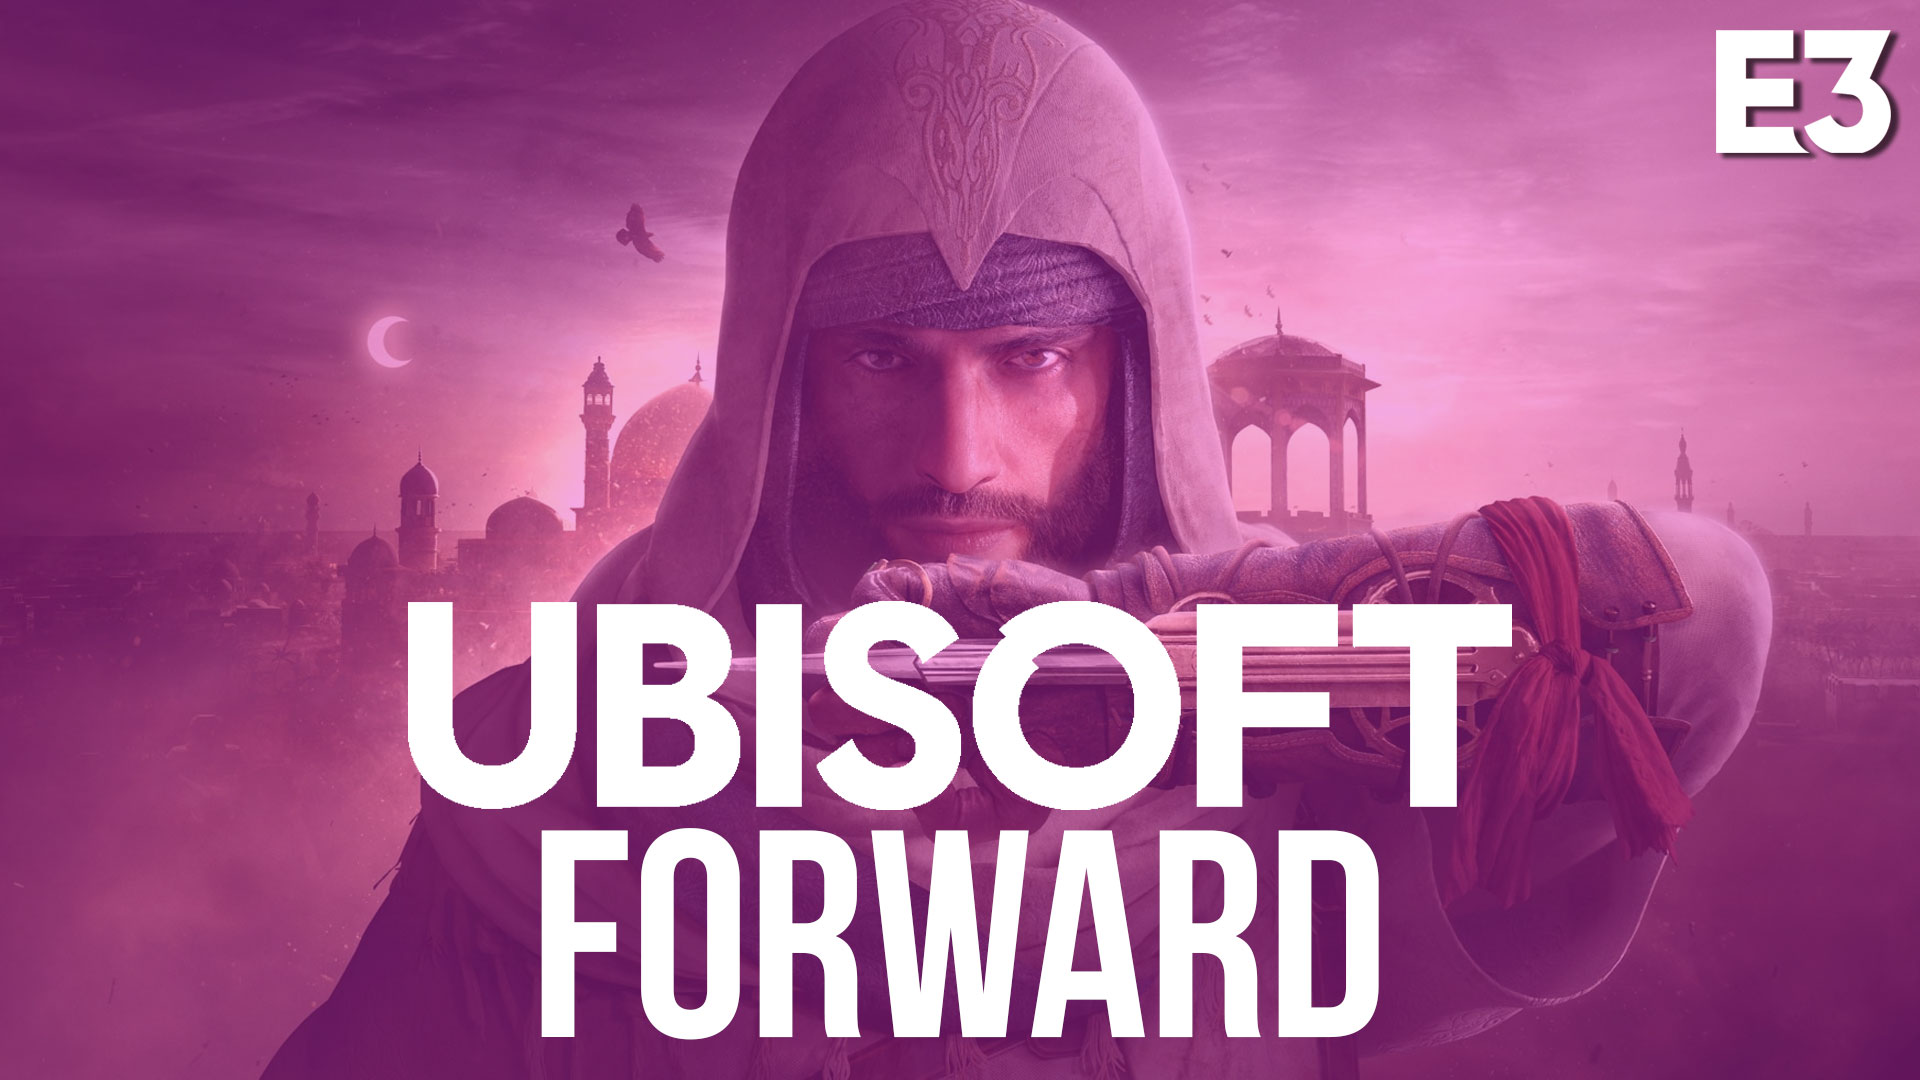 Future of Assassin's Creed Revealed at Ubisoft Forward Event